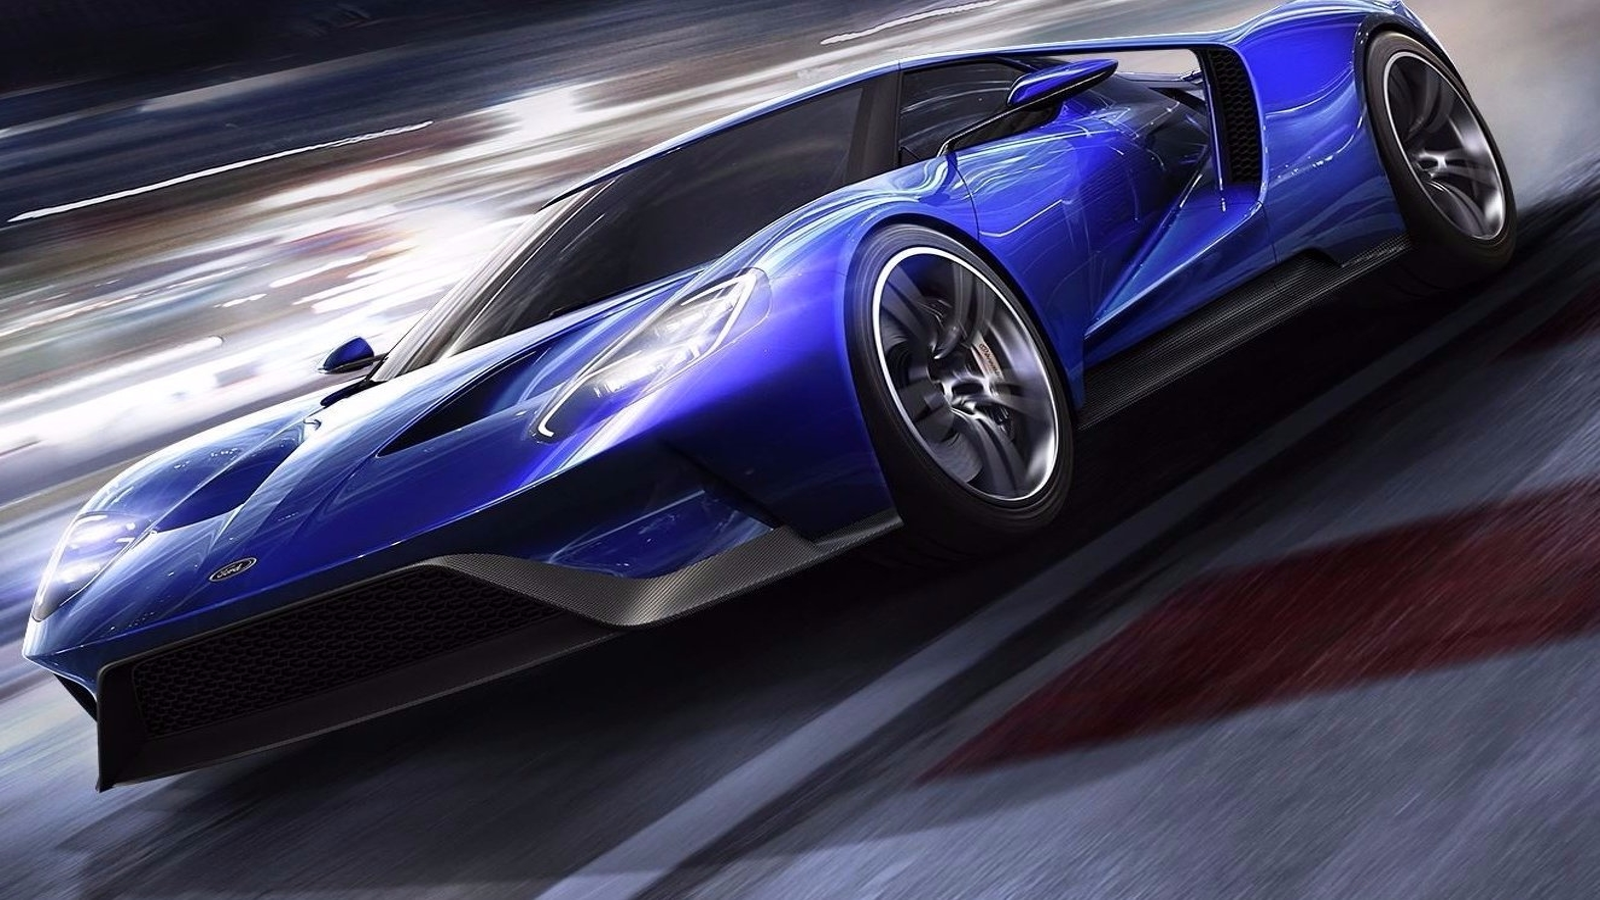 Forza Motorsport 6: Apex looks incredible on the PC at 4K